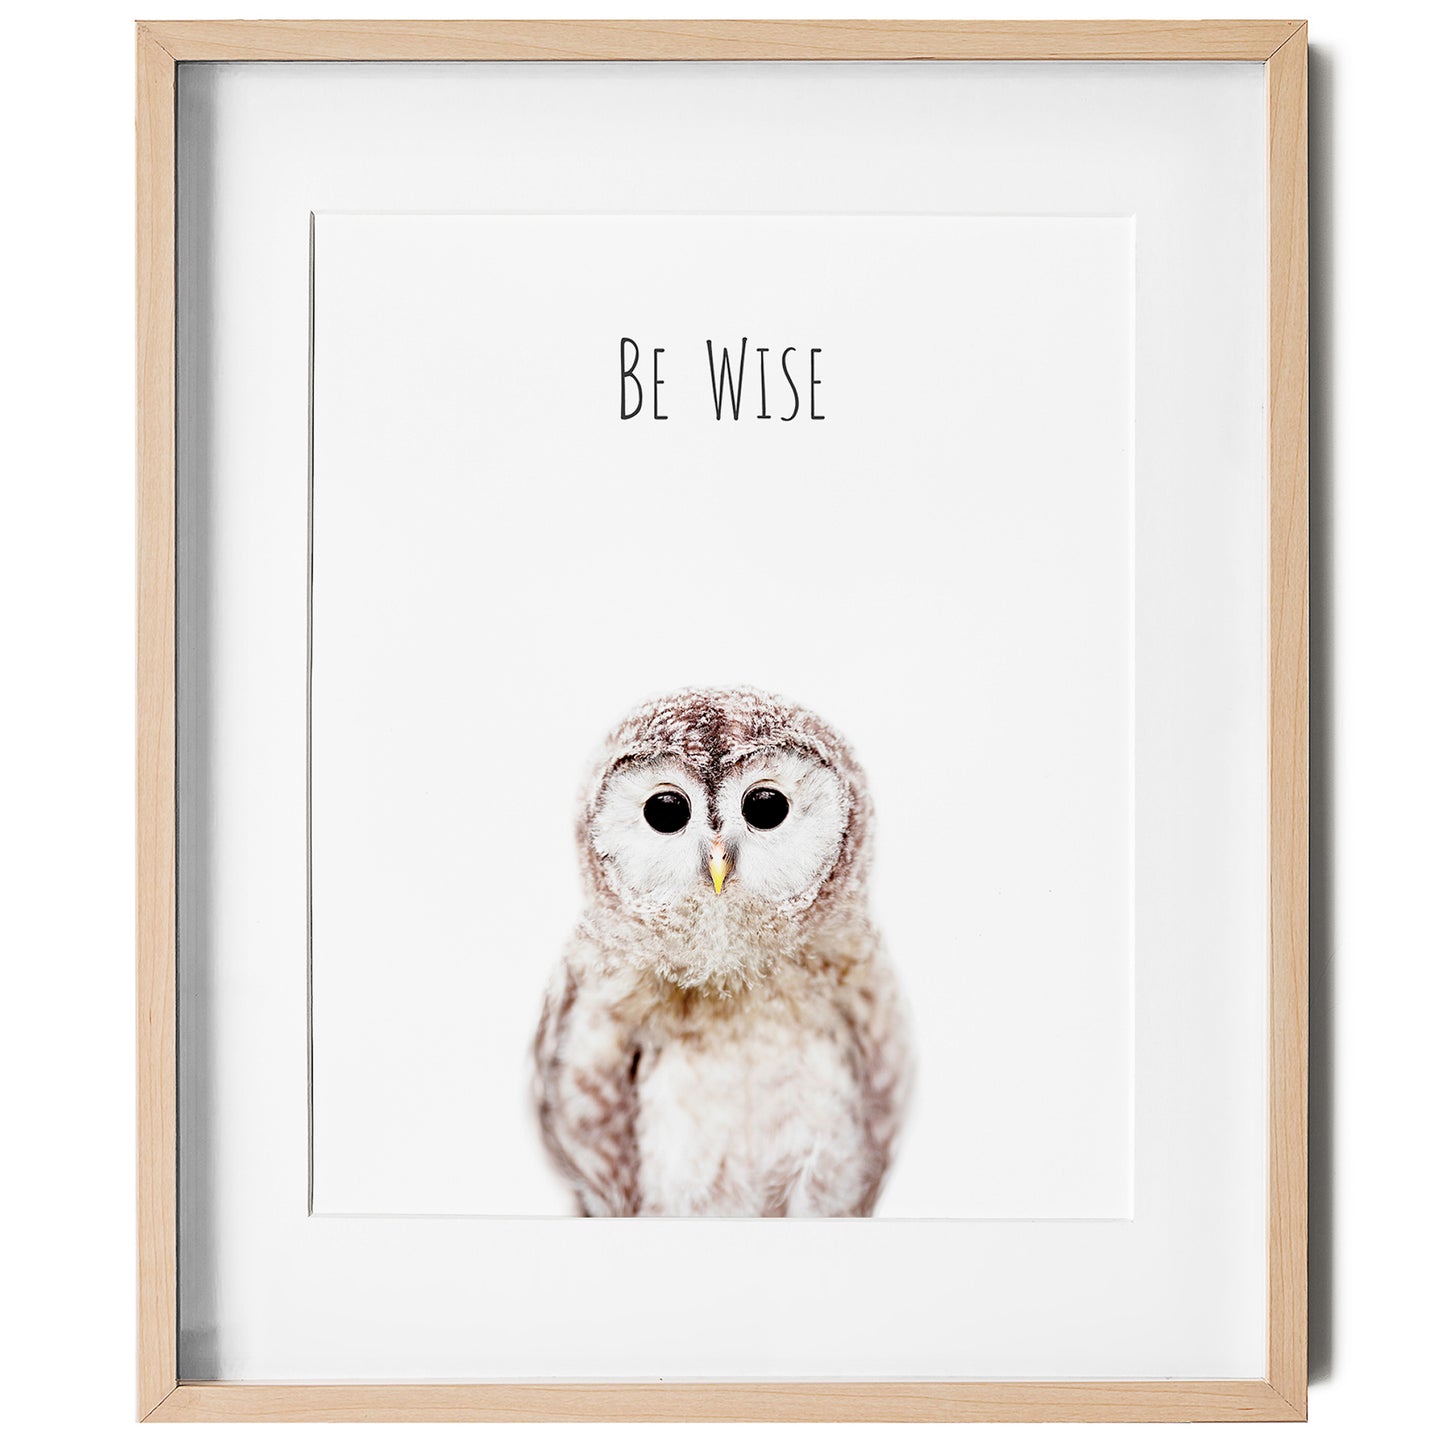 Owl Be Wise - Inspirational Wall Art for nursery or kids room